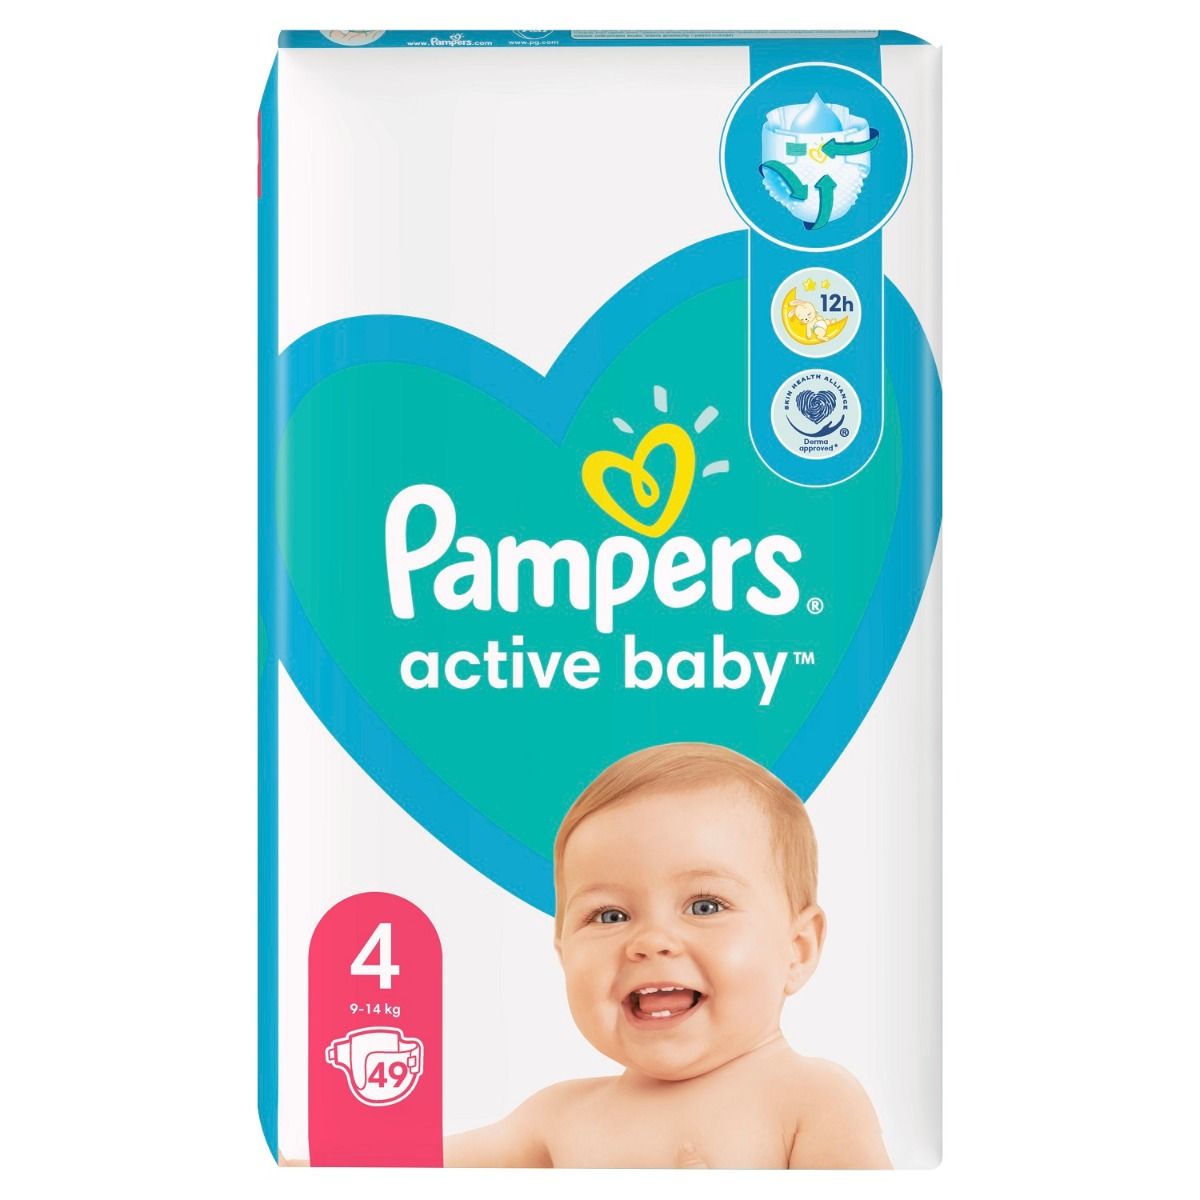 pieluchy pampers active baby 4 ceneo